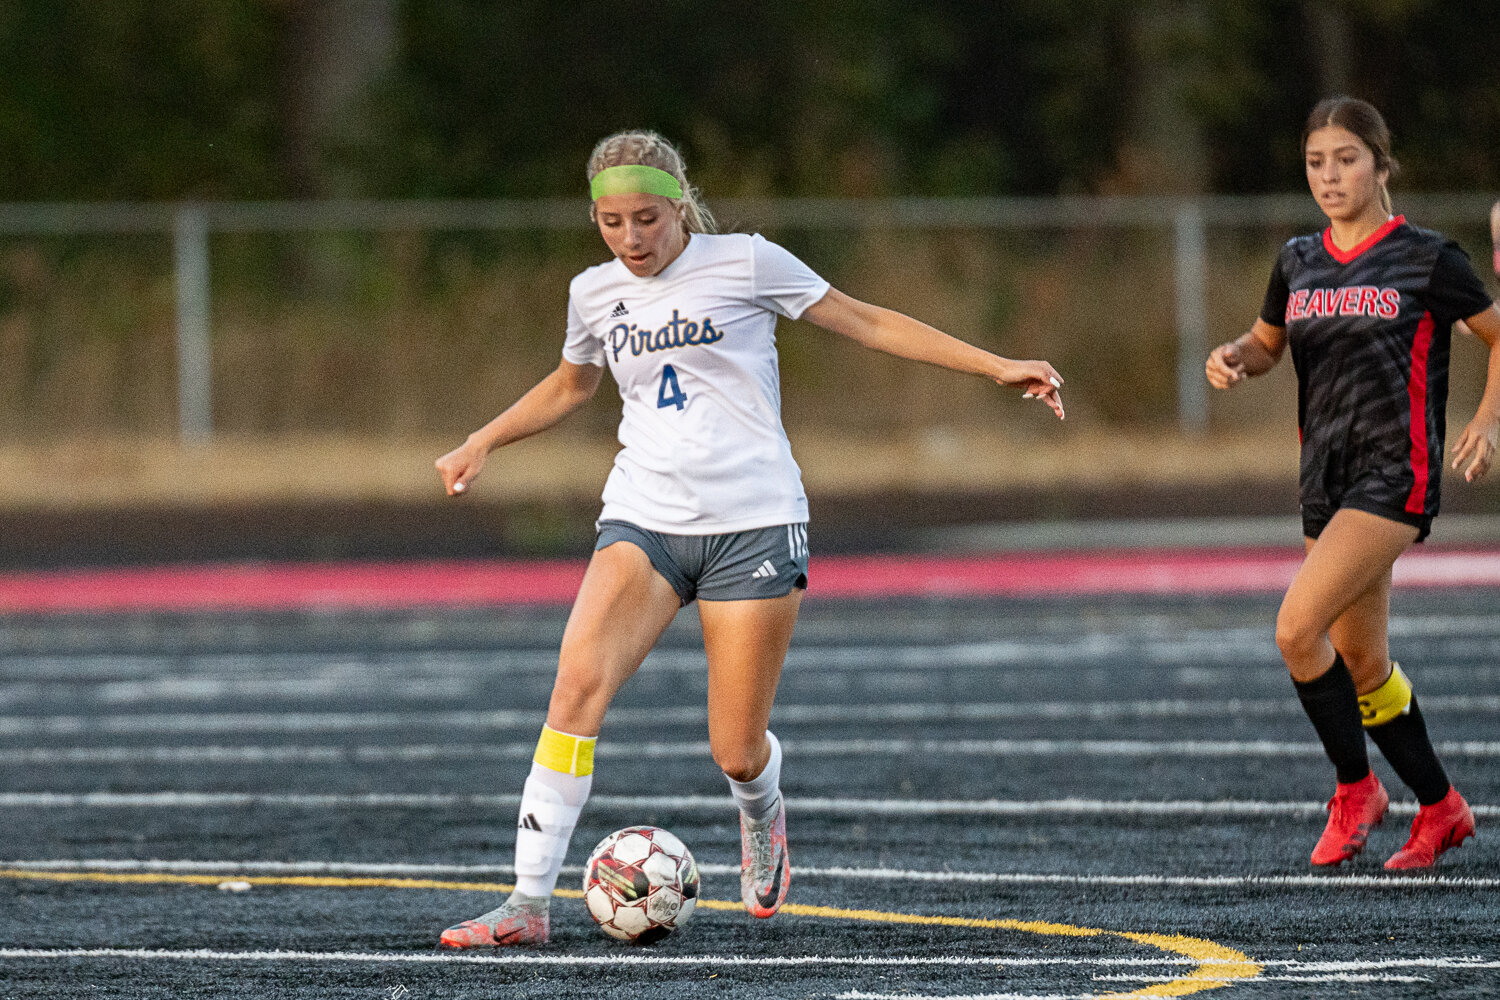 Adna's Lydia Tobin dribbles the ball during the Pirates' 0-0 tie against Tenino on Sept. 14 at Beaver Stadium.